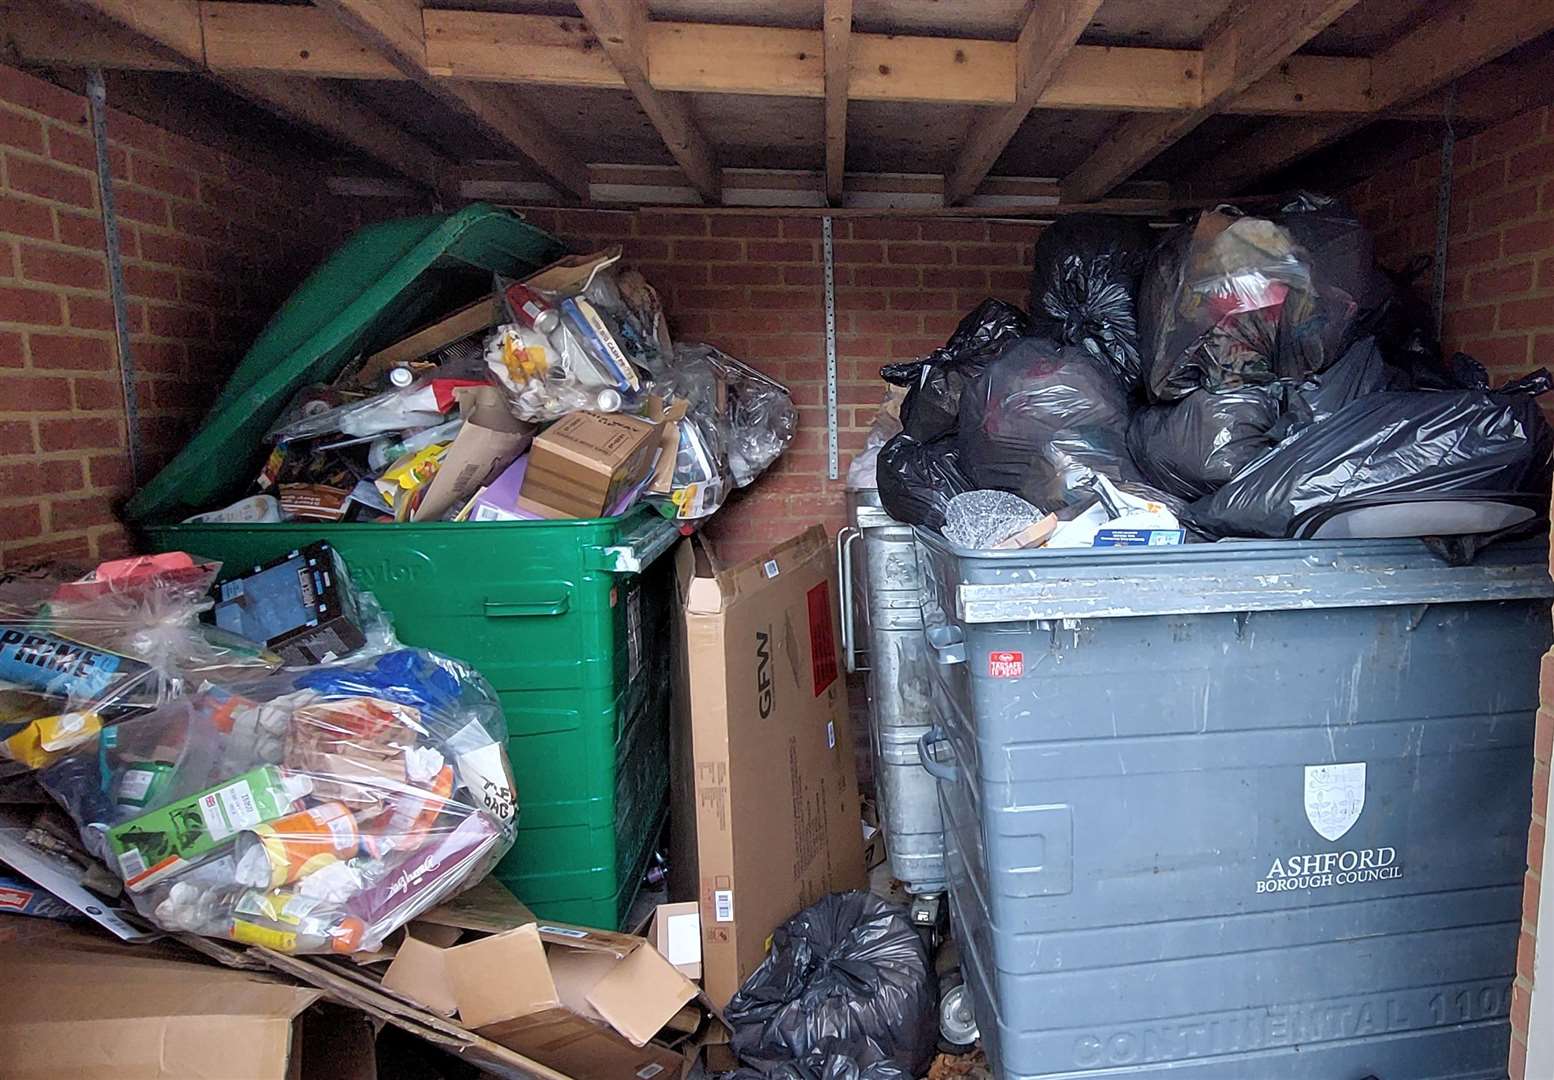 Ashford's Lee Wood says flats in Stanhope have also been affected by uncollected bins. Picture: Lee Wood